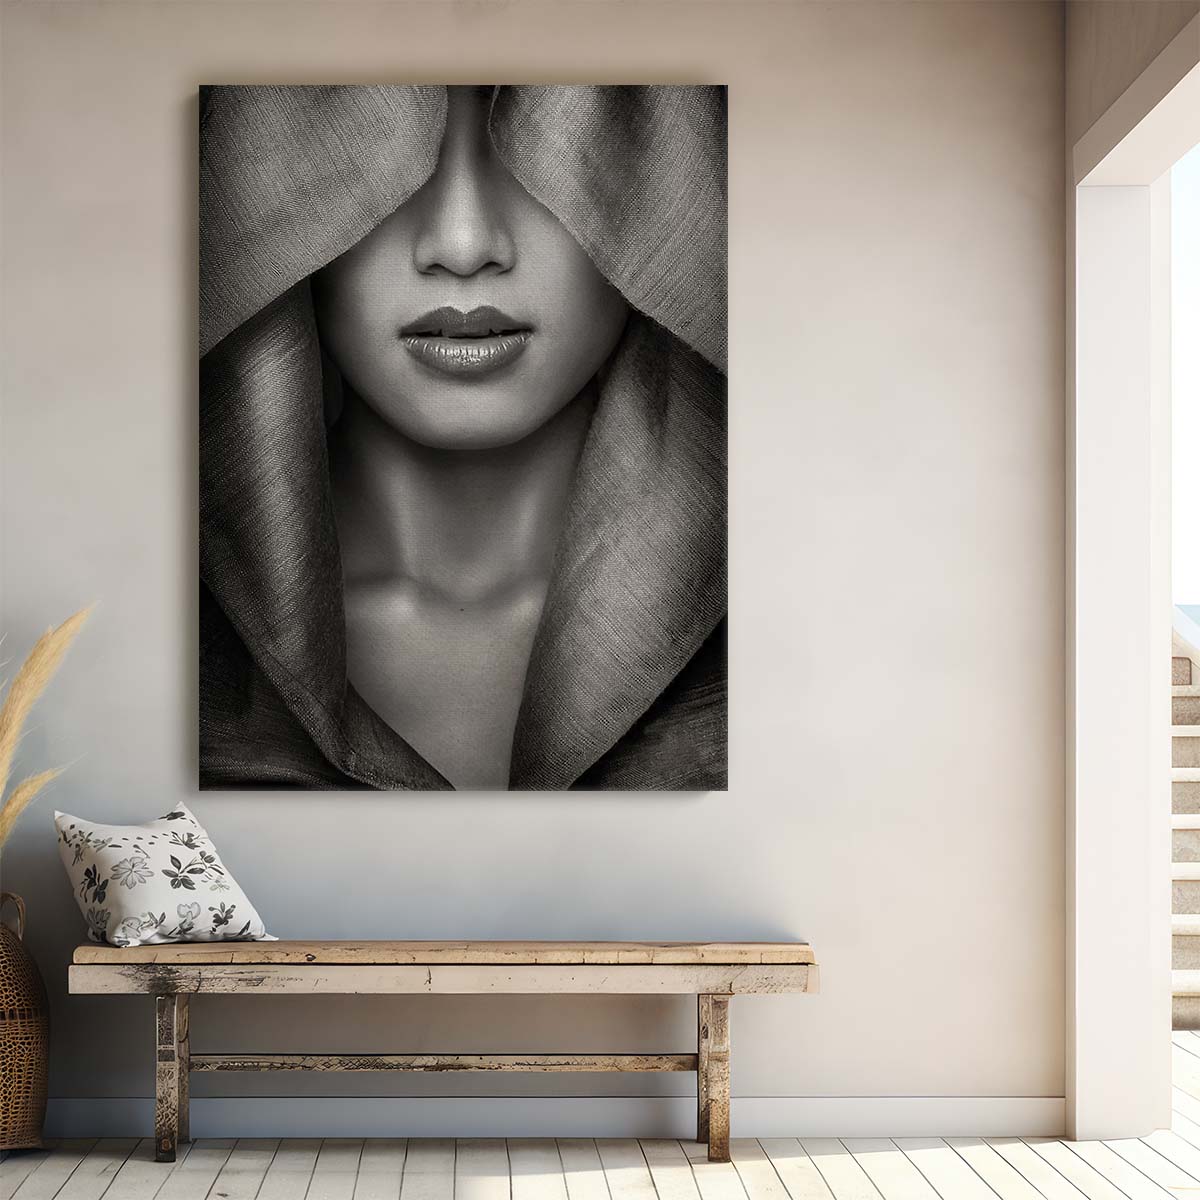 Monochrome Hooded Woman Portrait Photography Wall Art by Luxuriance Designs, made in USA